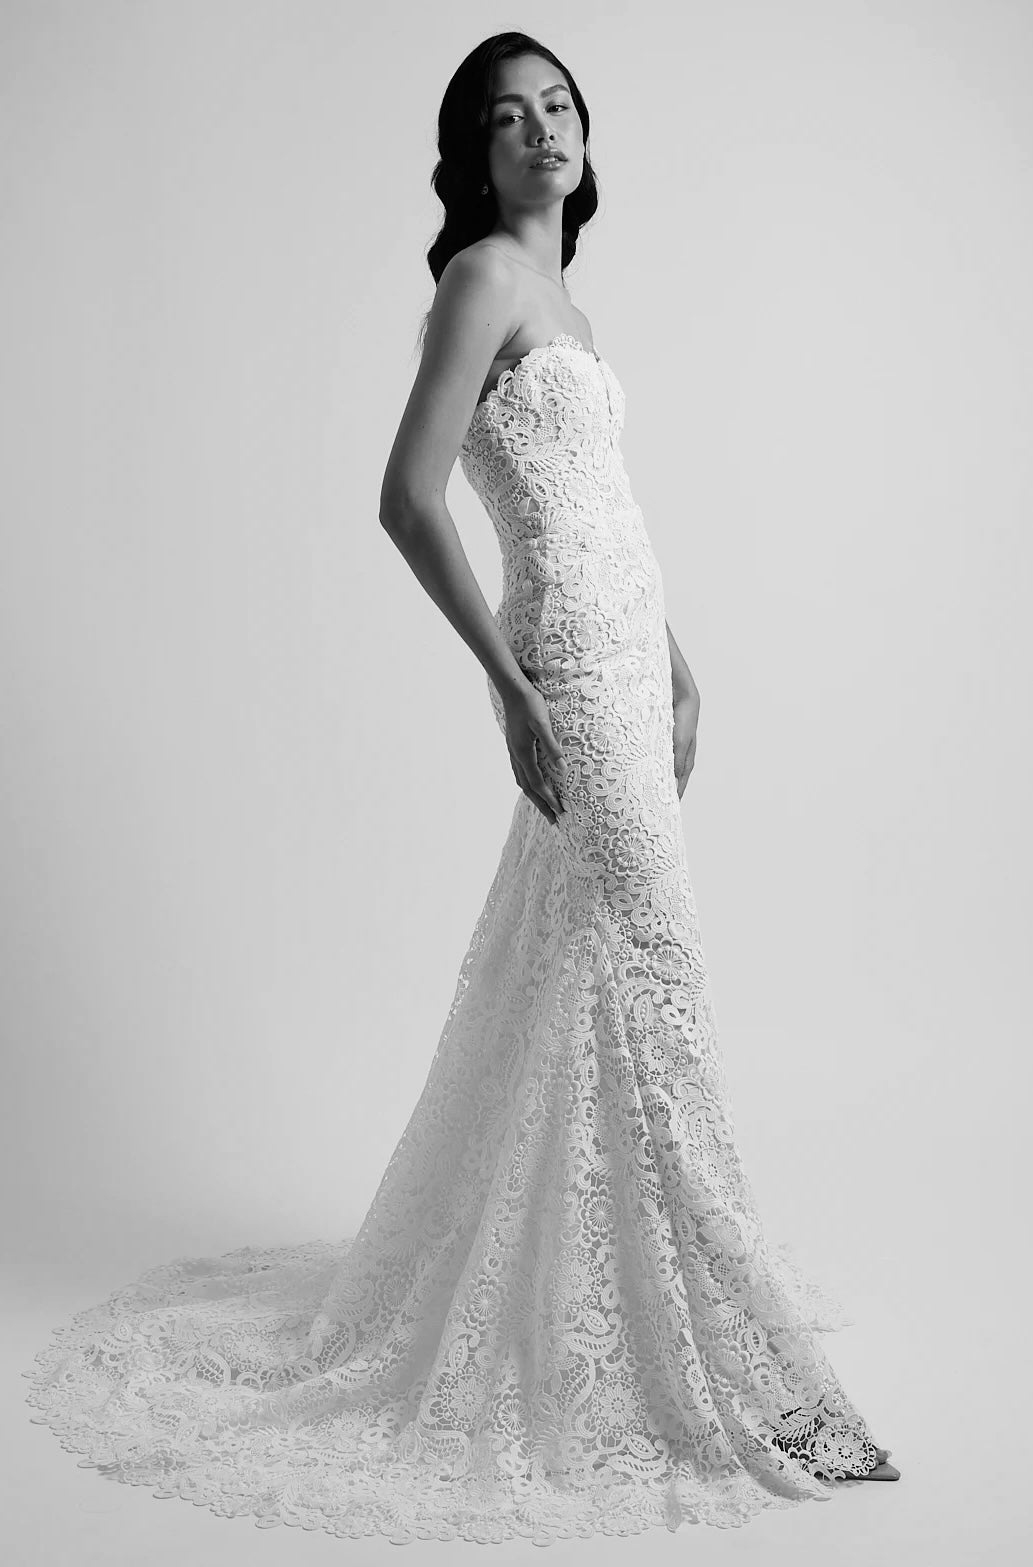 Strapless Guipure Lace Sheath Gown by Jaclyn Whyte - Image 2